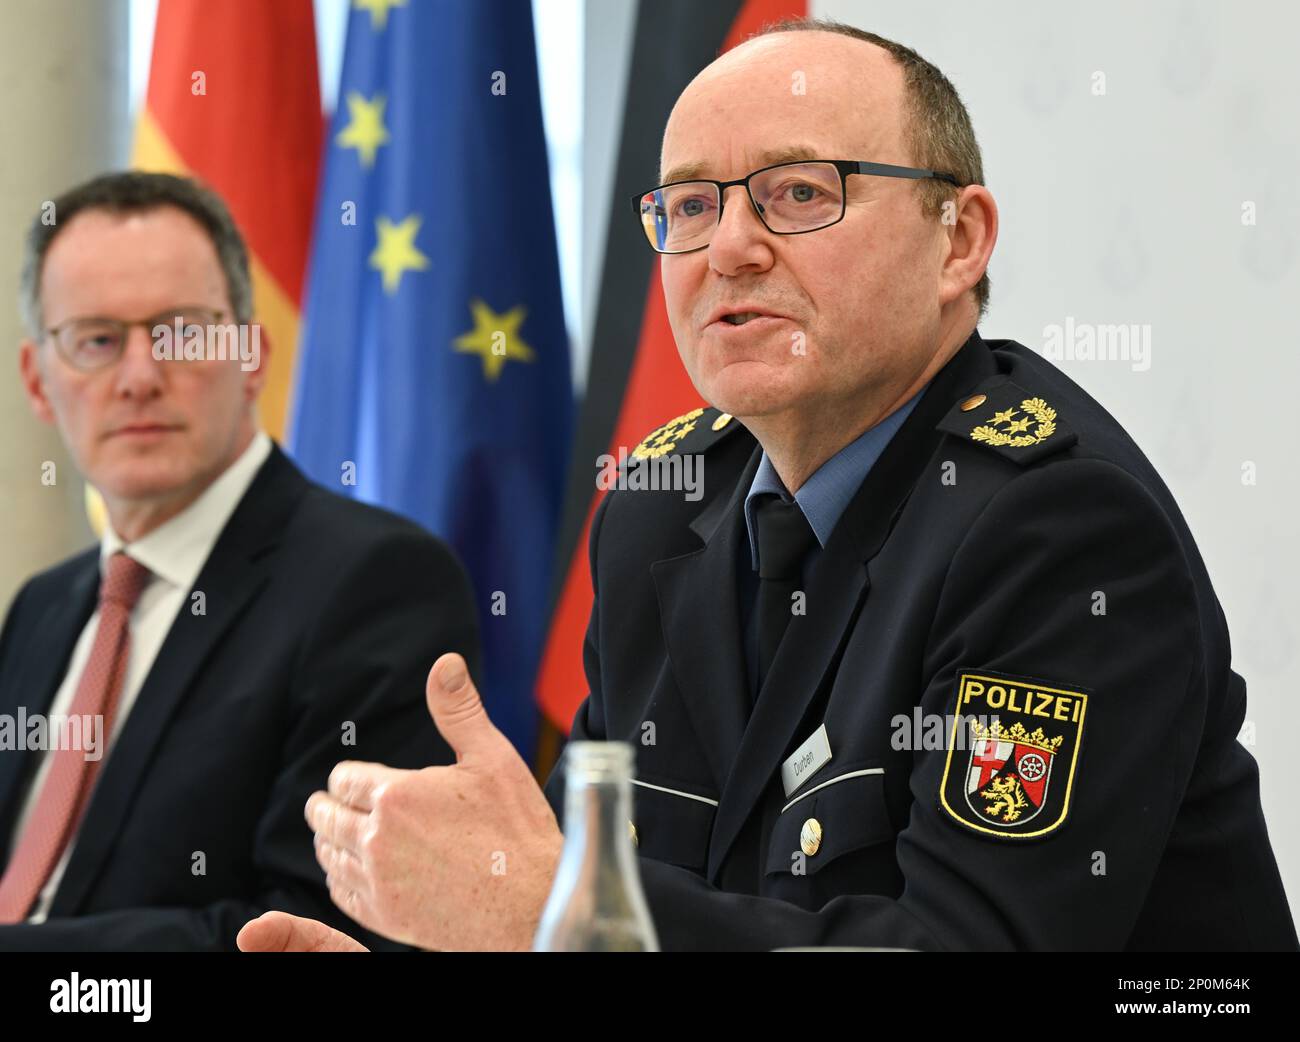 Mainz, Germany. 03rd Mar, 2023. Friedel Durben (r), Inspector of the Rhineland-Palatinate Police, and Michael Ebling (SPD), Interior Minister of Rhineland-Palatinate, present reforms and modernizations in the fight against crime at a press conference at the Ministry of the Interior. The aim is to better position the state police for the challenges of crime in times of increasing digitalization and internationalization. Credit: Arne Dedert/dpa/Alamy Live News Stock Photo